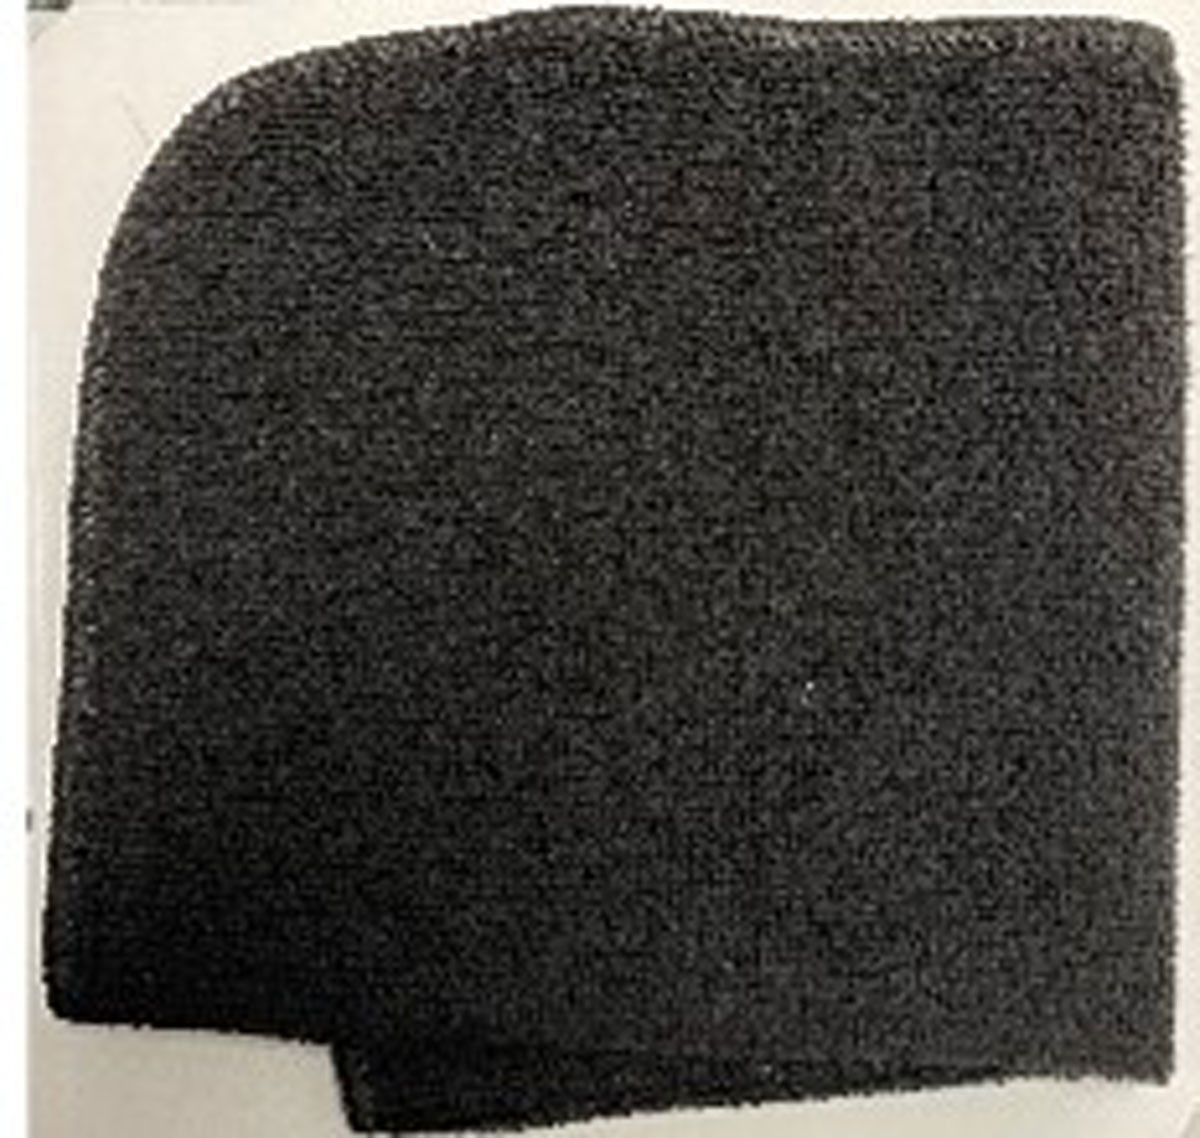 Does this black microfiber cloth fray before purchase?